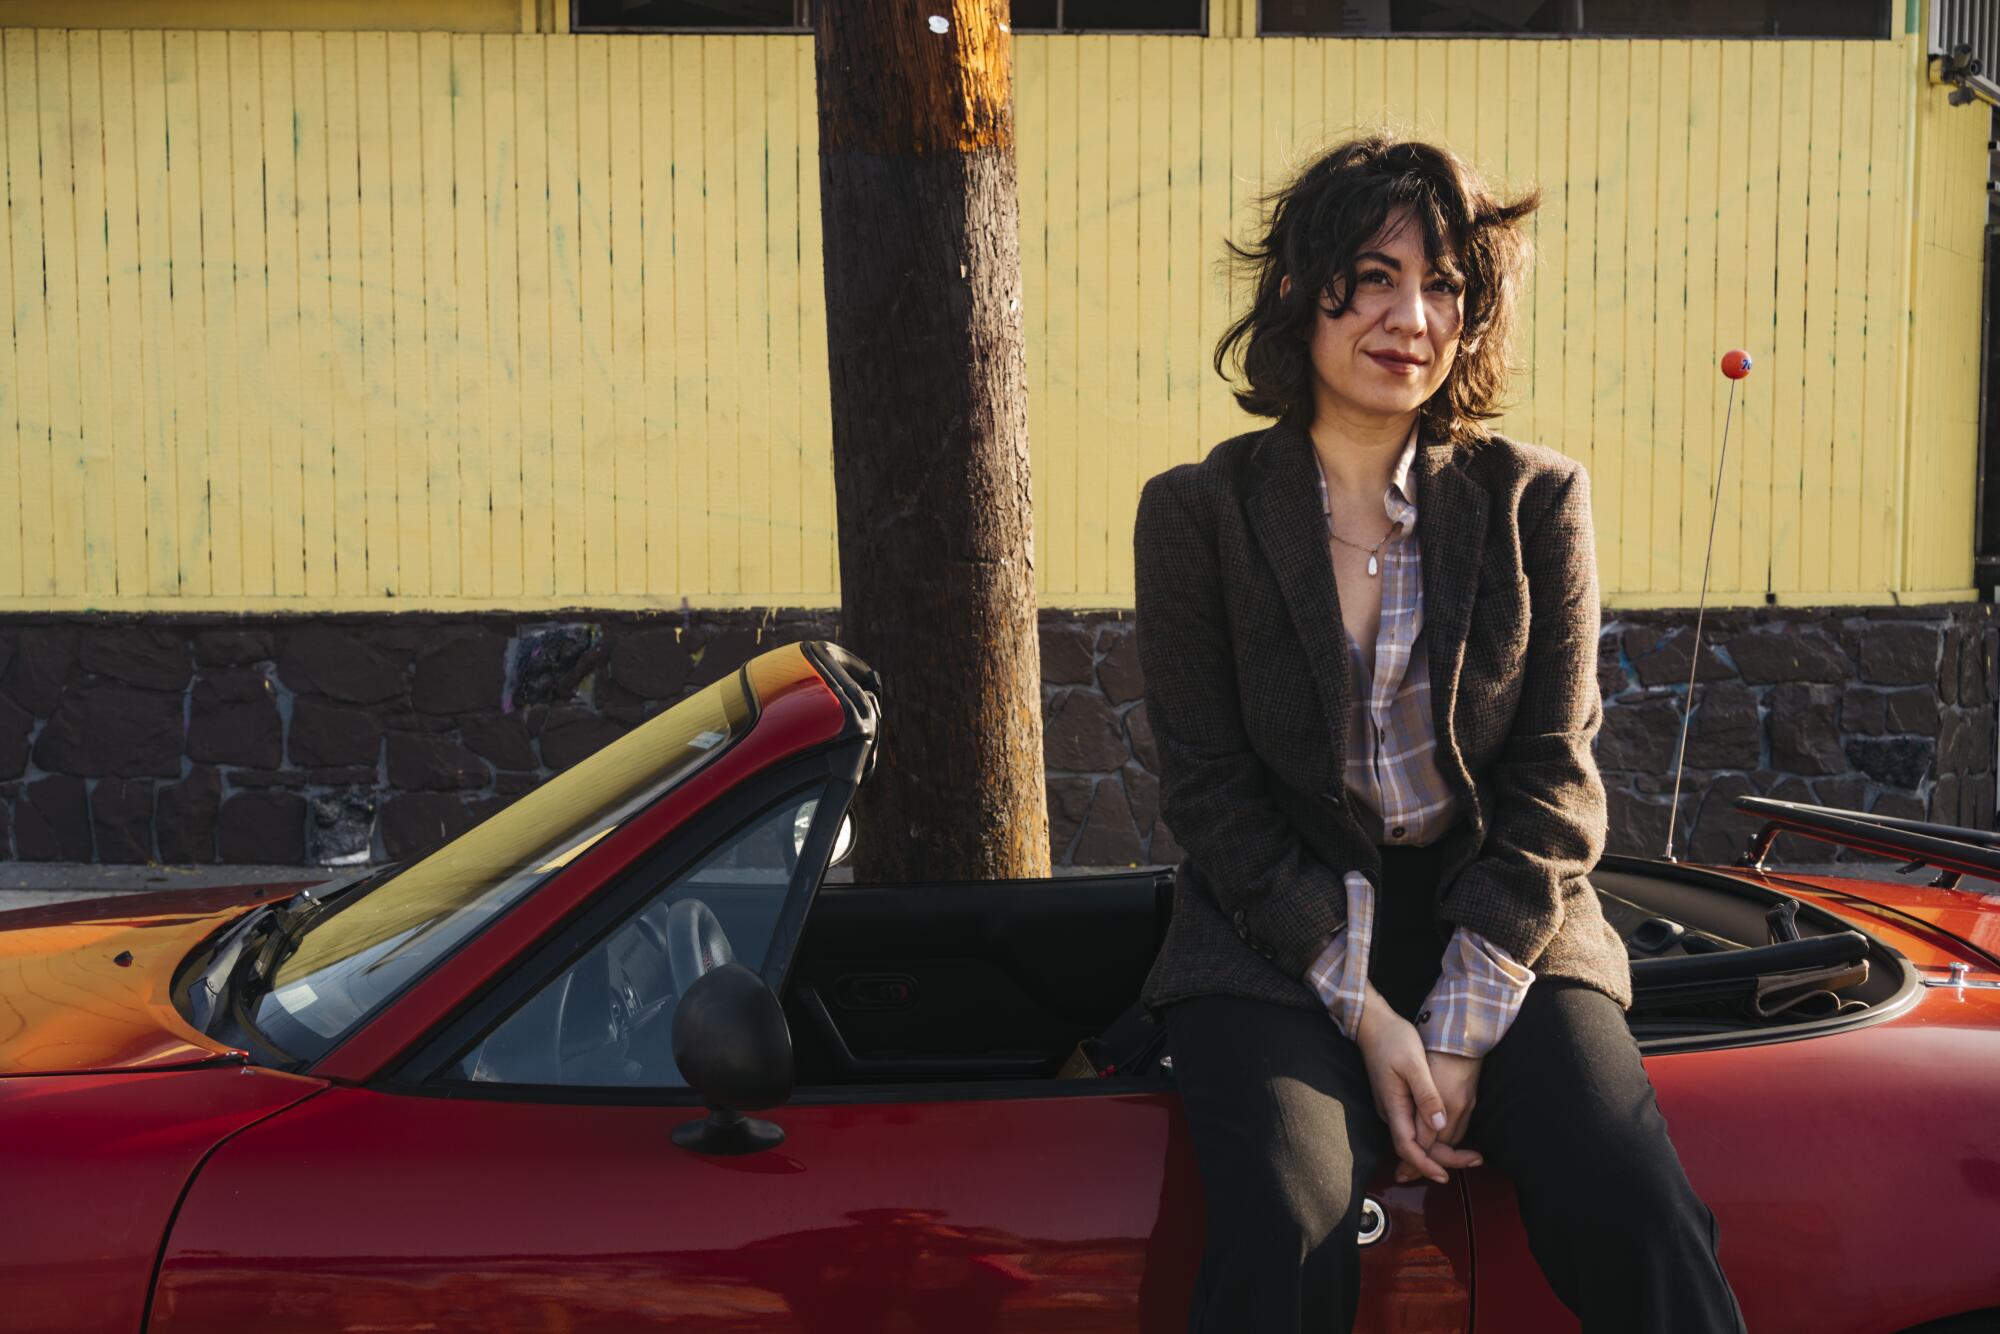 Christina Catherine Martinez, a comedian, writer, and art critic, poses for a portrait with her found Mazda Miata